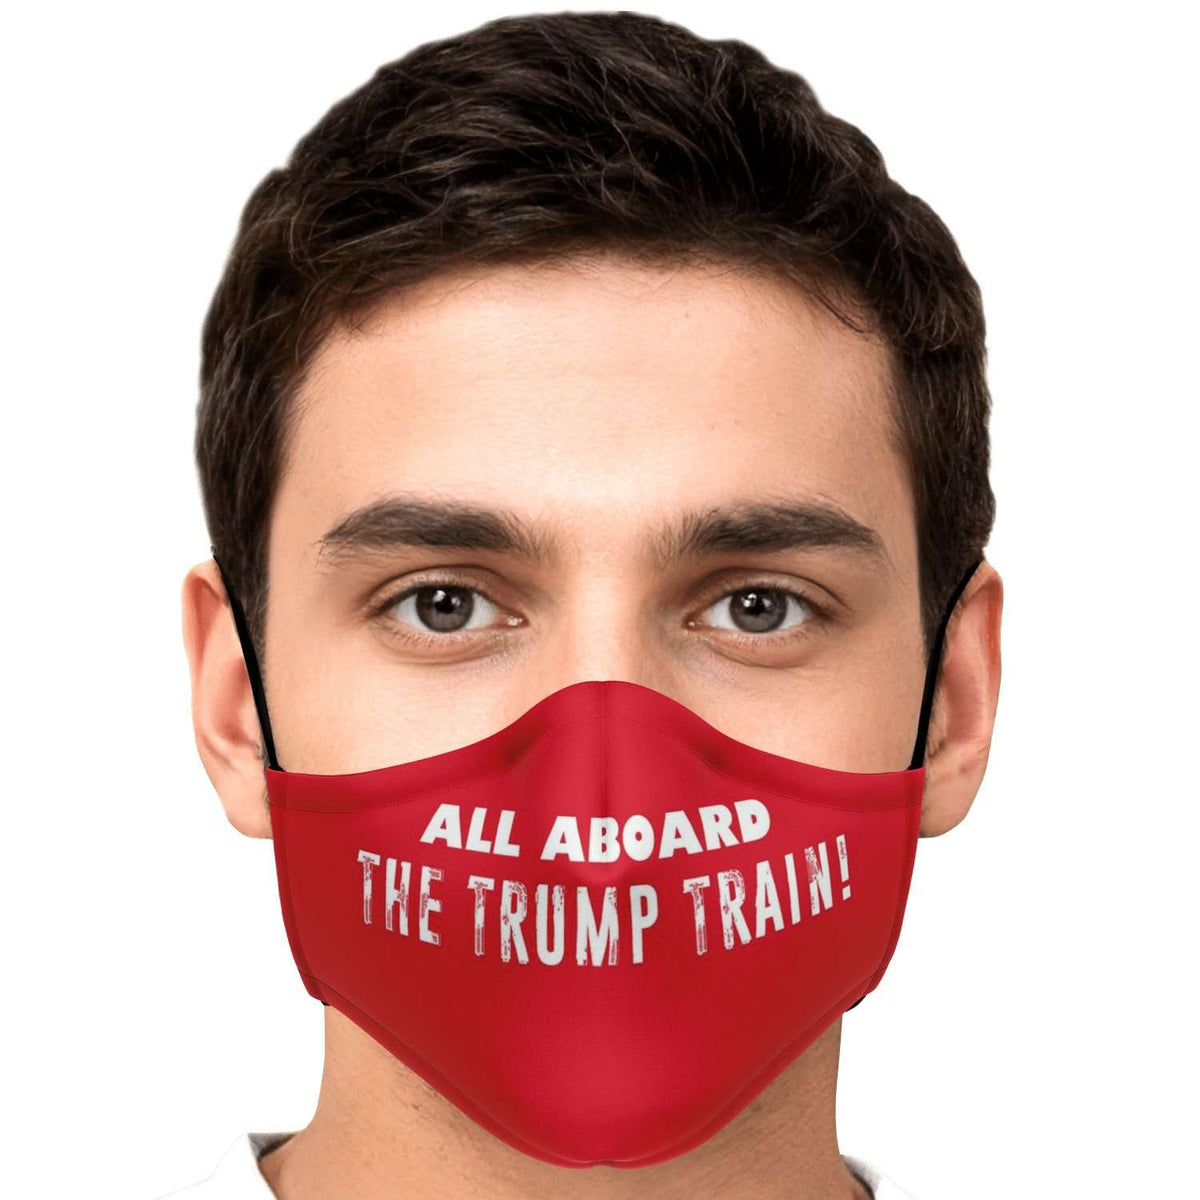 Designs by MyUtopia Shout Out:All Aboard The Trump Train Fitted Face Mask w. Adjustable Ear Loops,Adult / Single / No filters,Fabric Face Mask